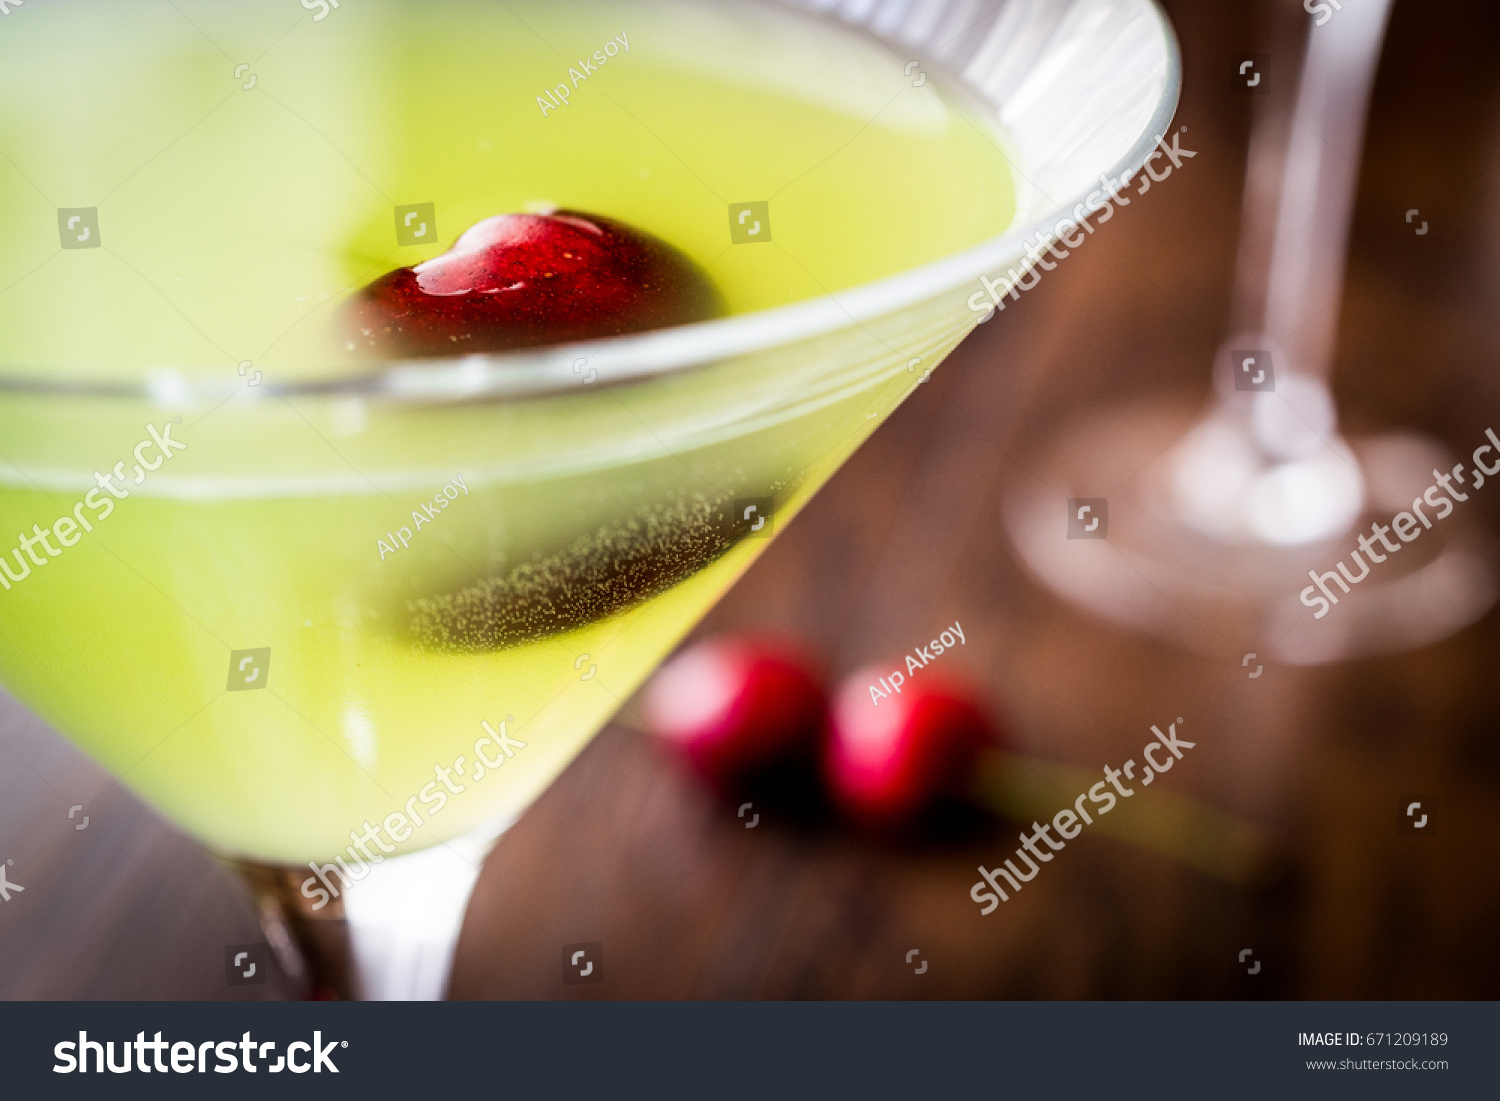 Appletini Cocktail with cherry on wooden surface.
 #671209189